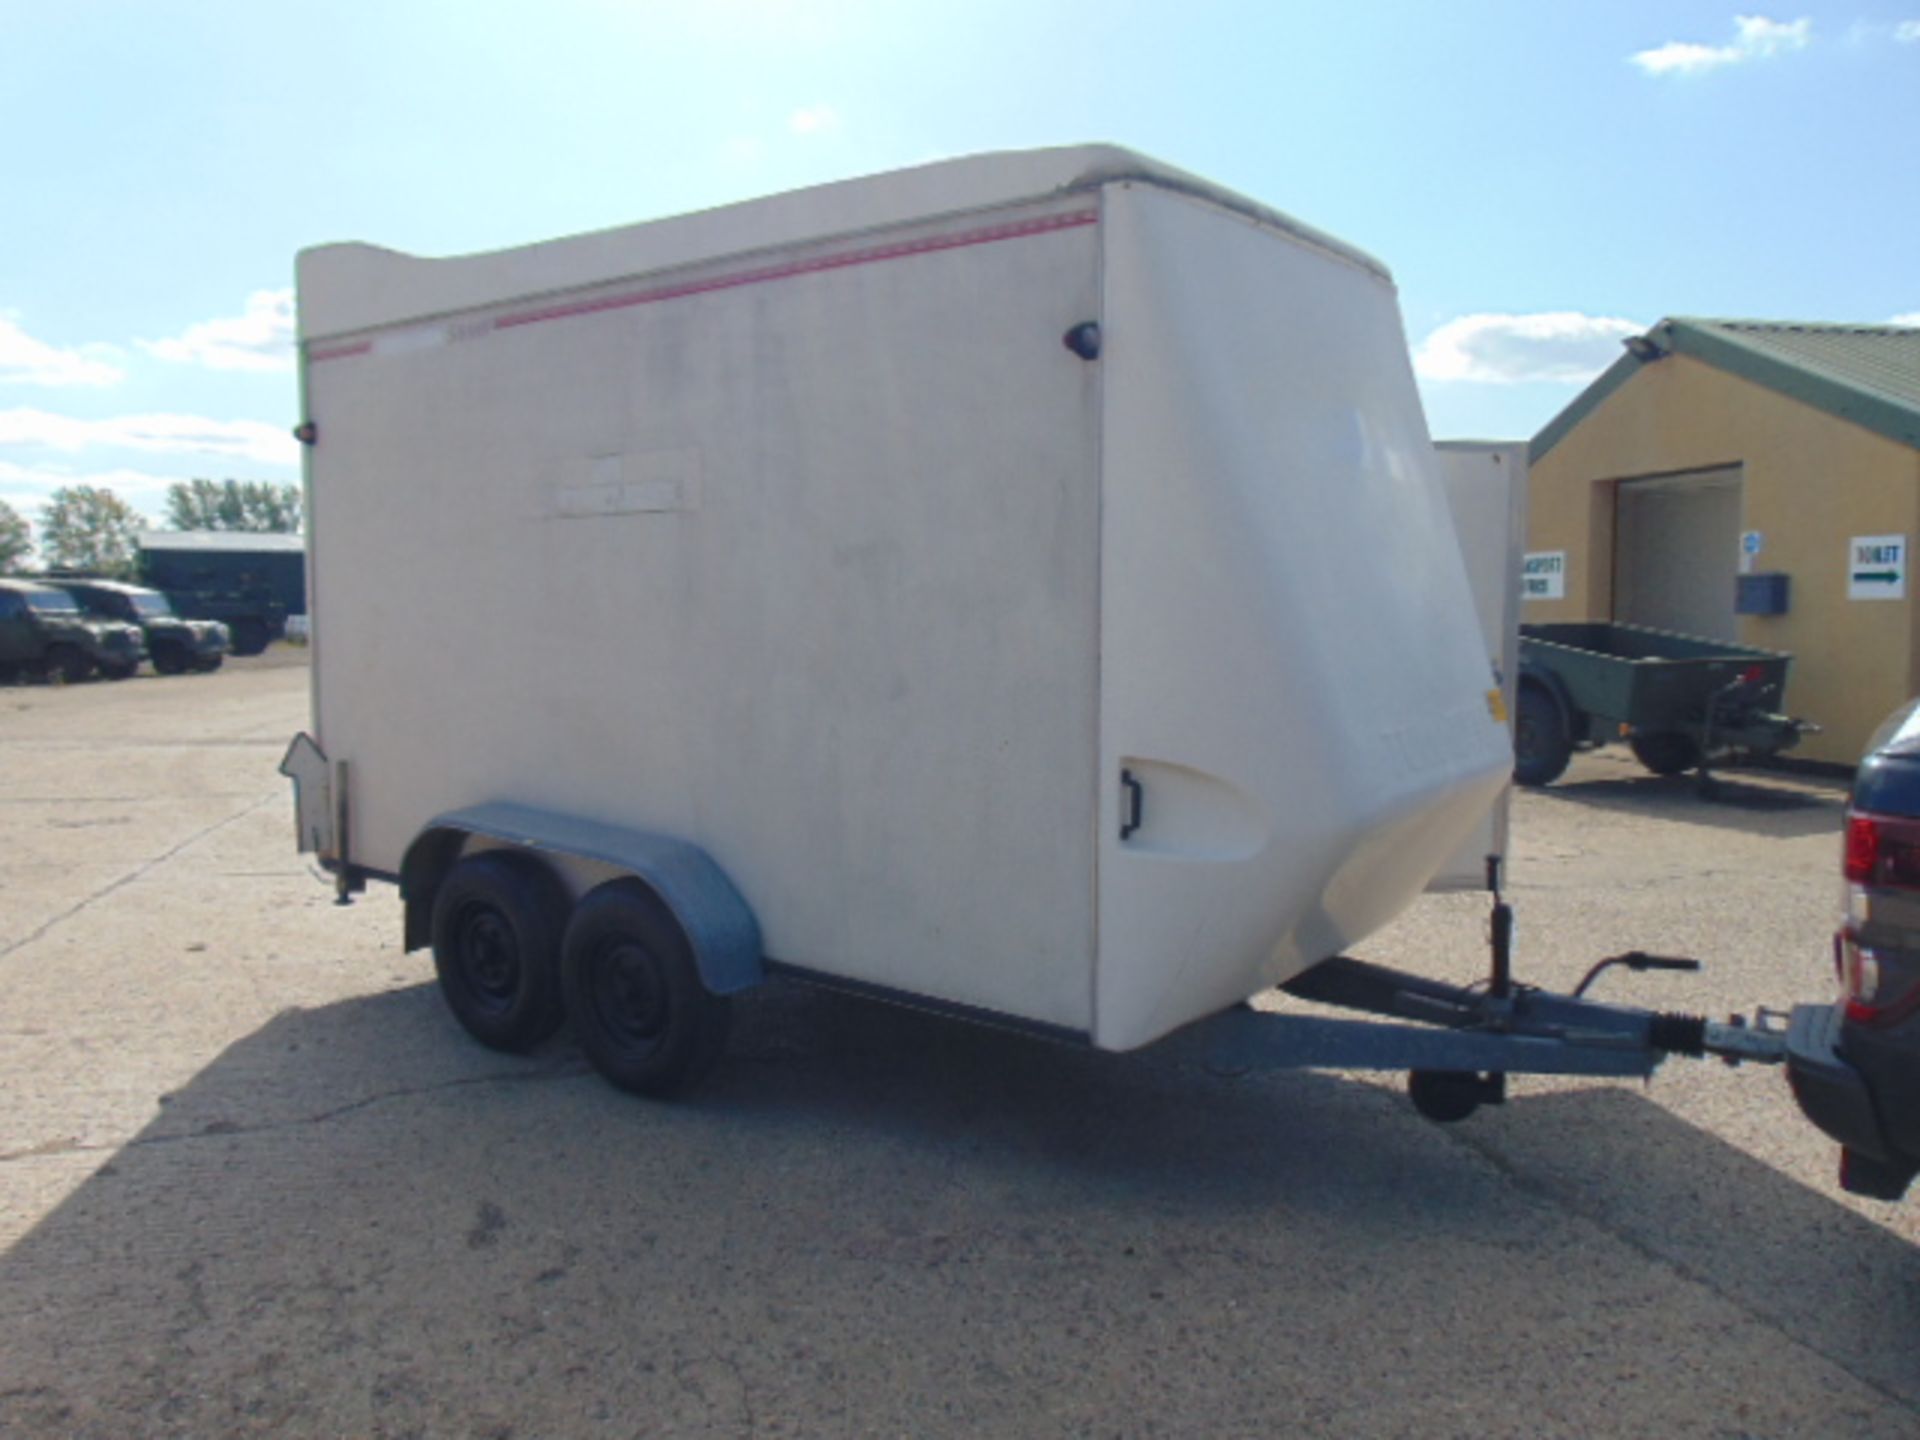 Twin Axle Tow A Van 580H Box Trailer c/w Dropdown Tailgate / Loading Ramp and Solar Panels